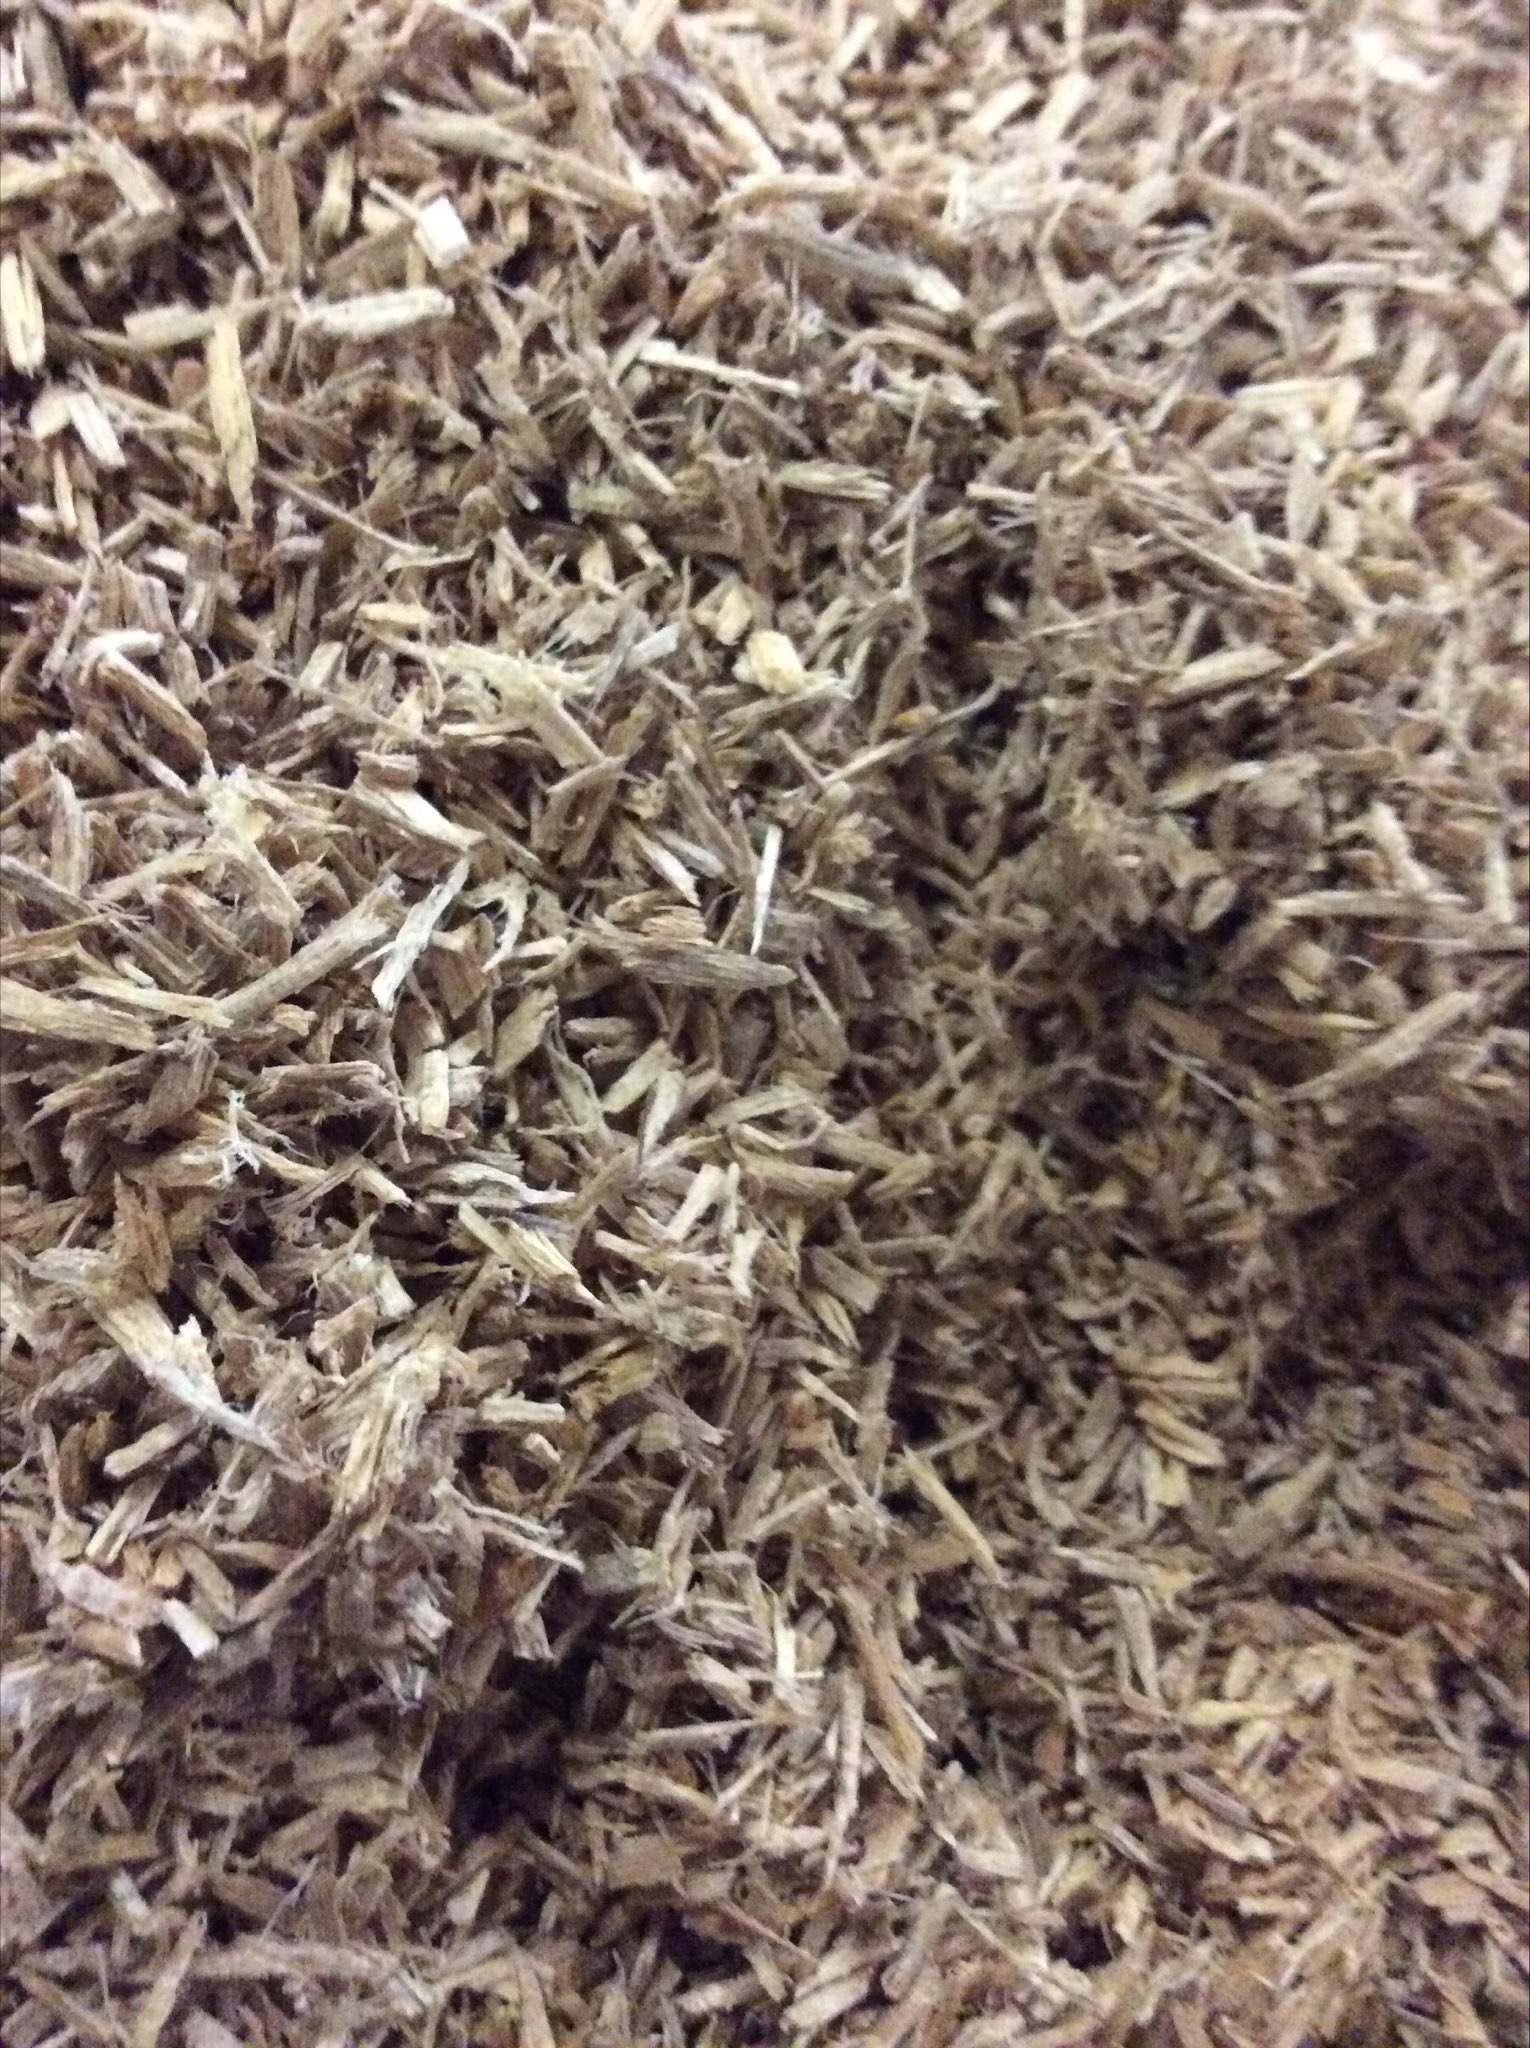 piccolo wood chips for smoking work great in hand held units